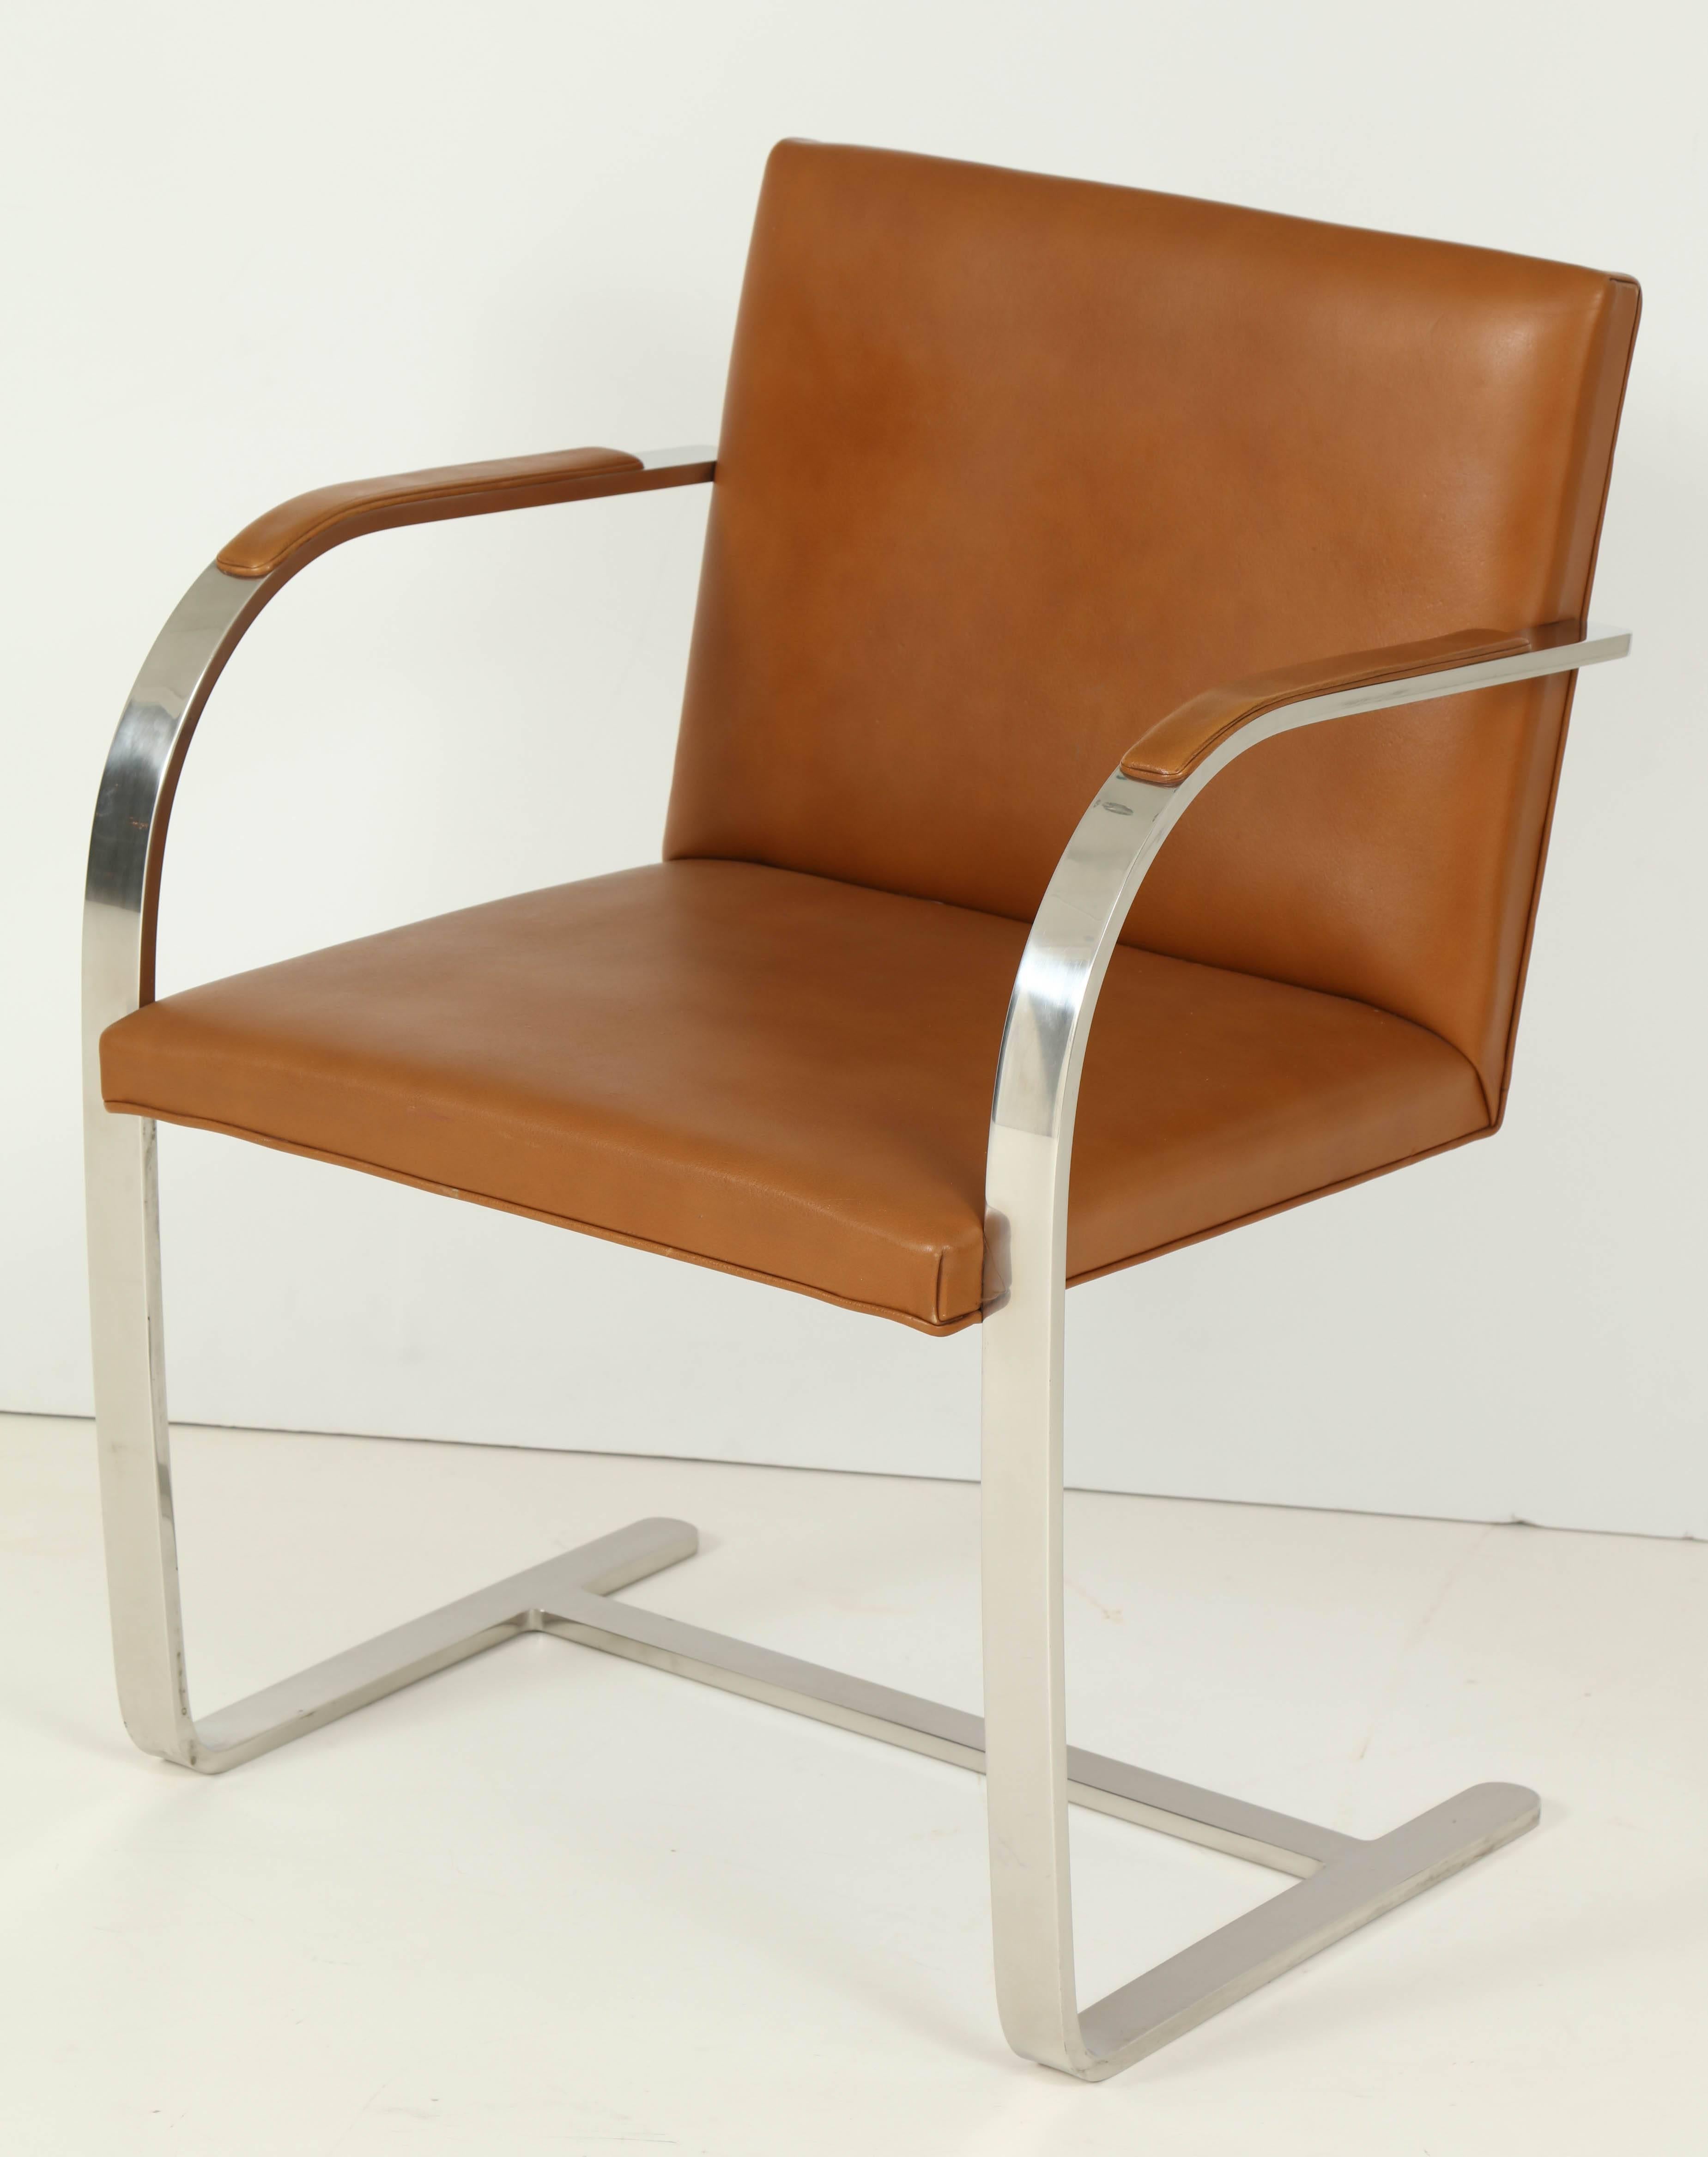 Ludwig Mies van der Rohe's flat bar Brno Chair is comprised of polished chrome-plated steel and leather, made circa 1960s by Knoll. These chairs retain their original brown leather upholstery and arm pads as well as one of it's original Knoll